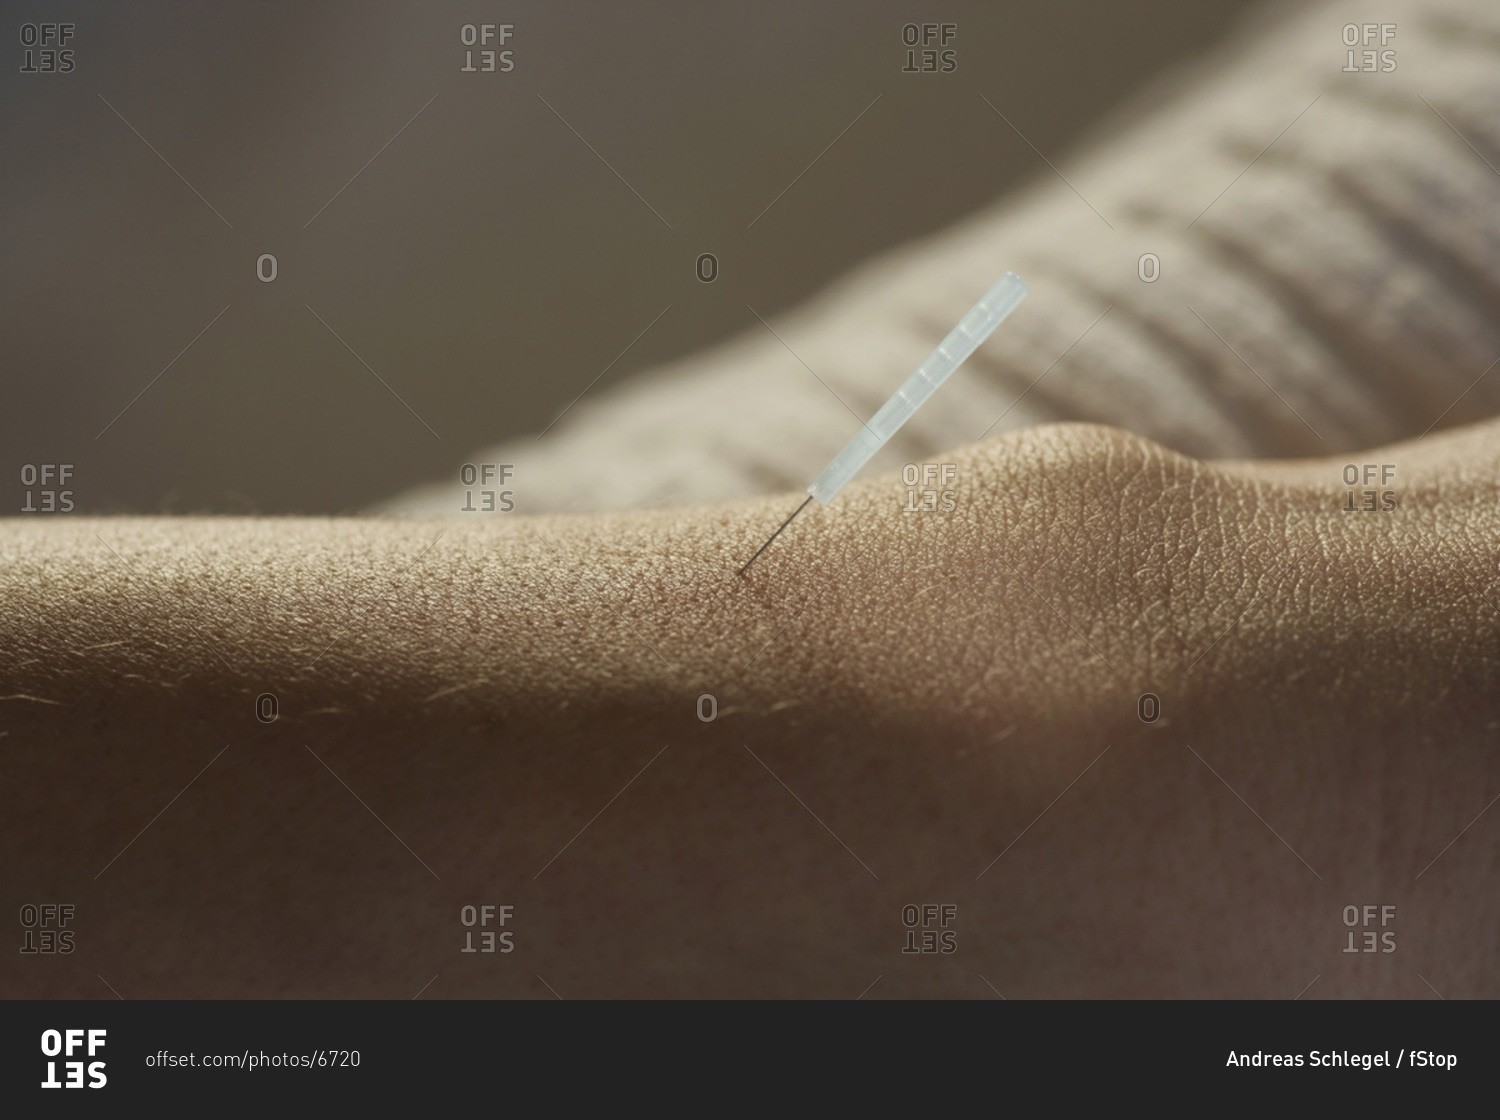 Young woman receiving acupuncture on wrist